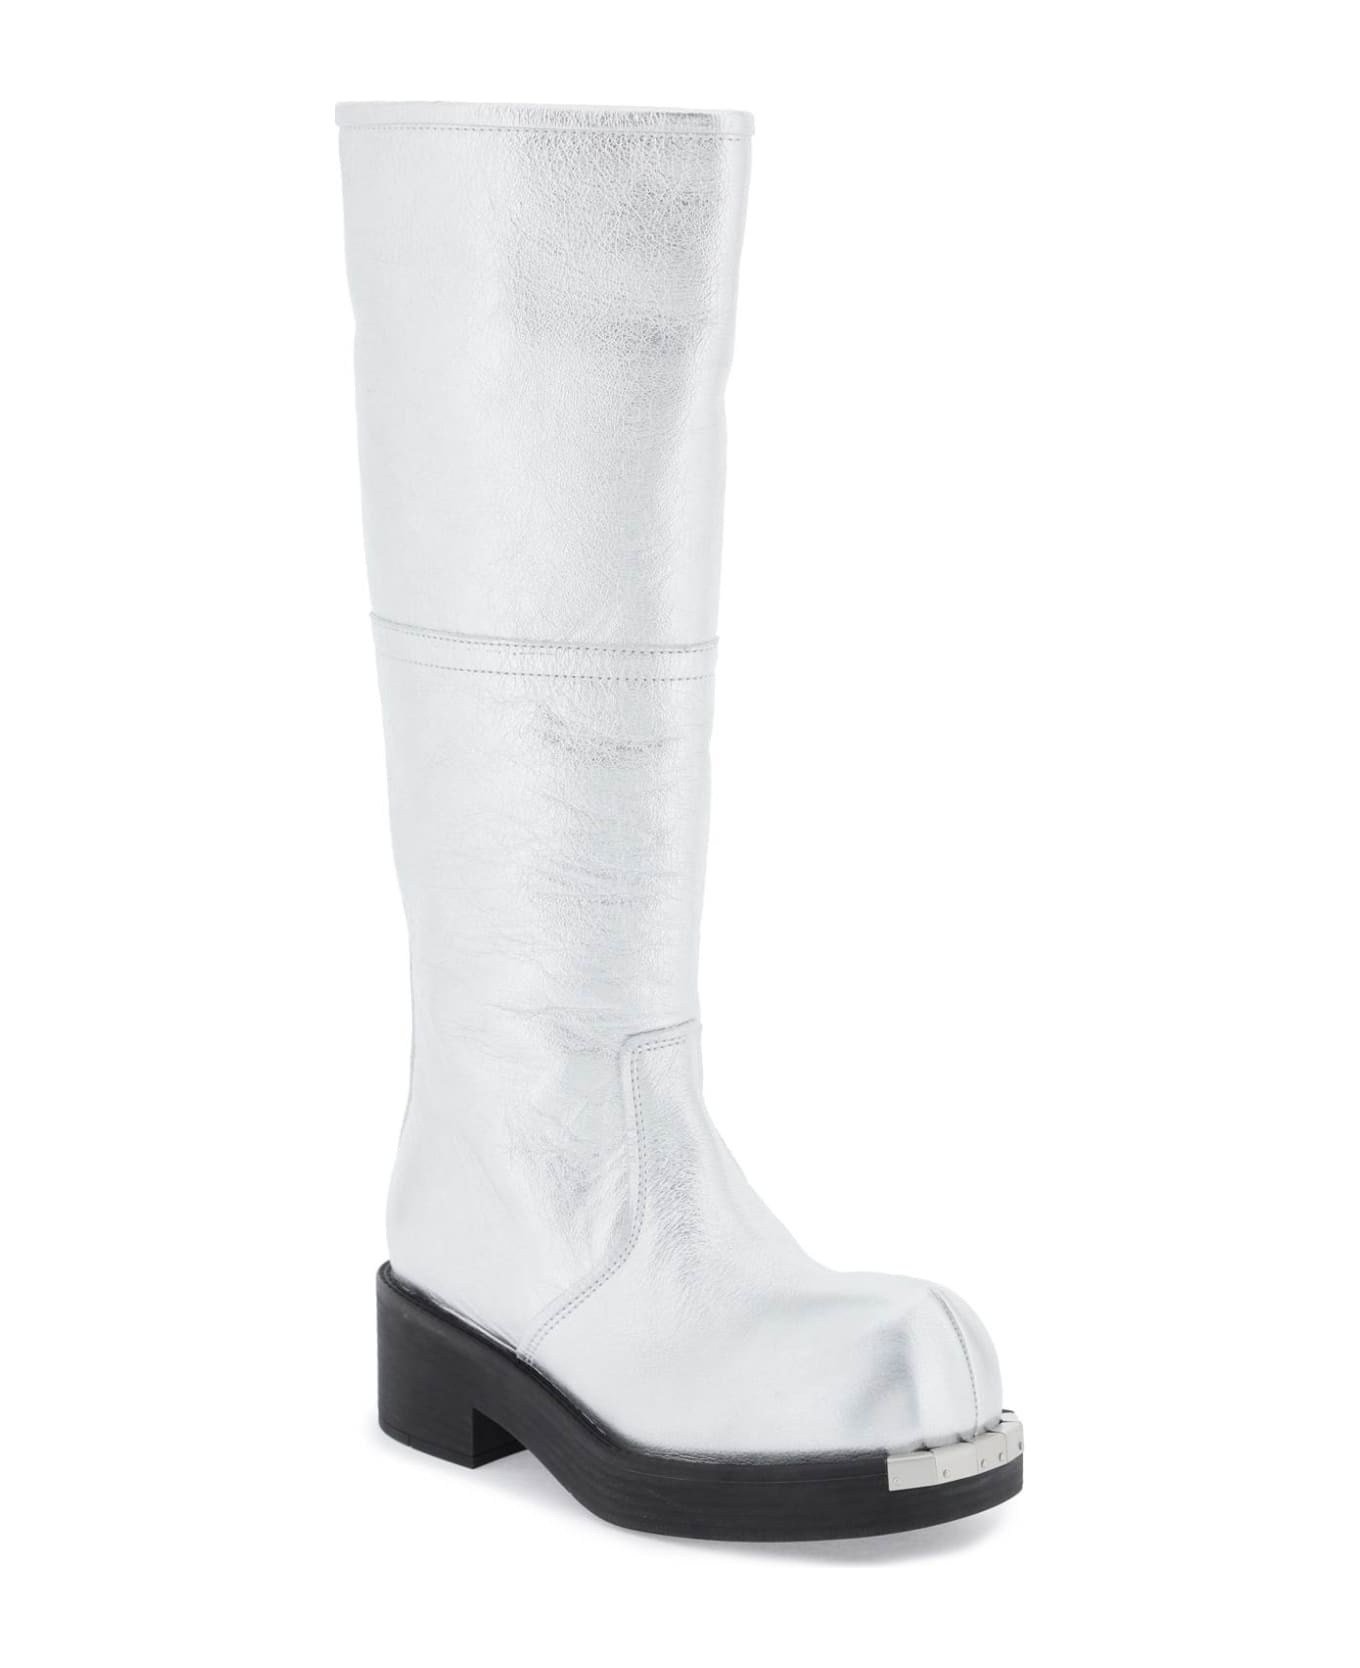 MM6 Maison Margiela Laminated Leather Boots - SILVER (Silver)